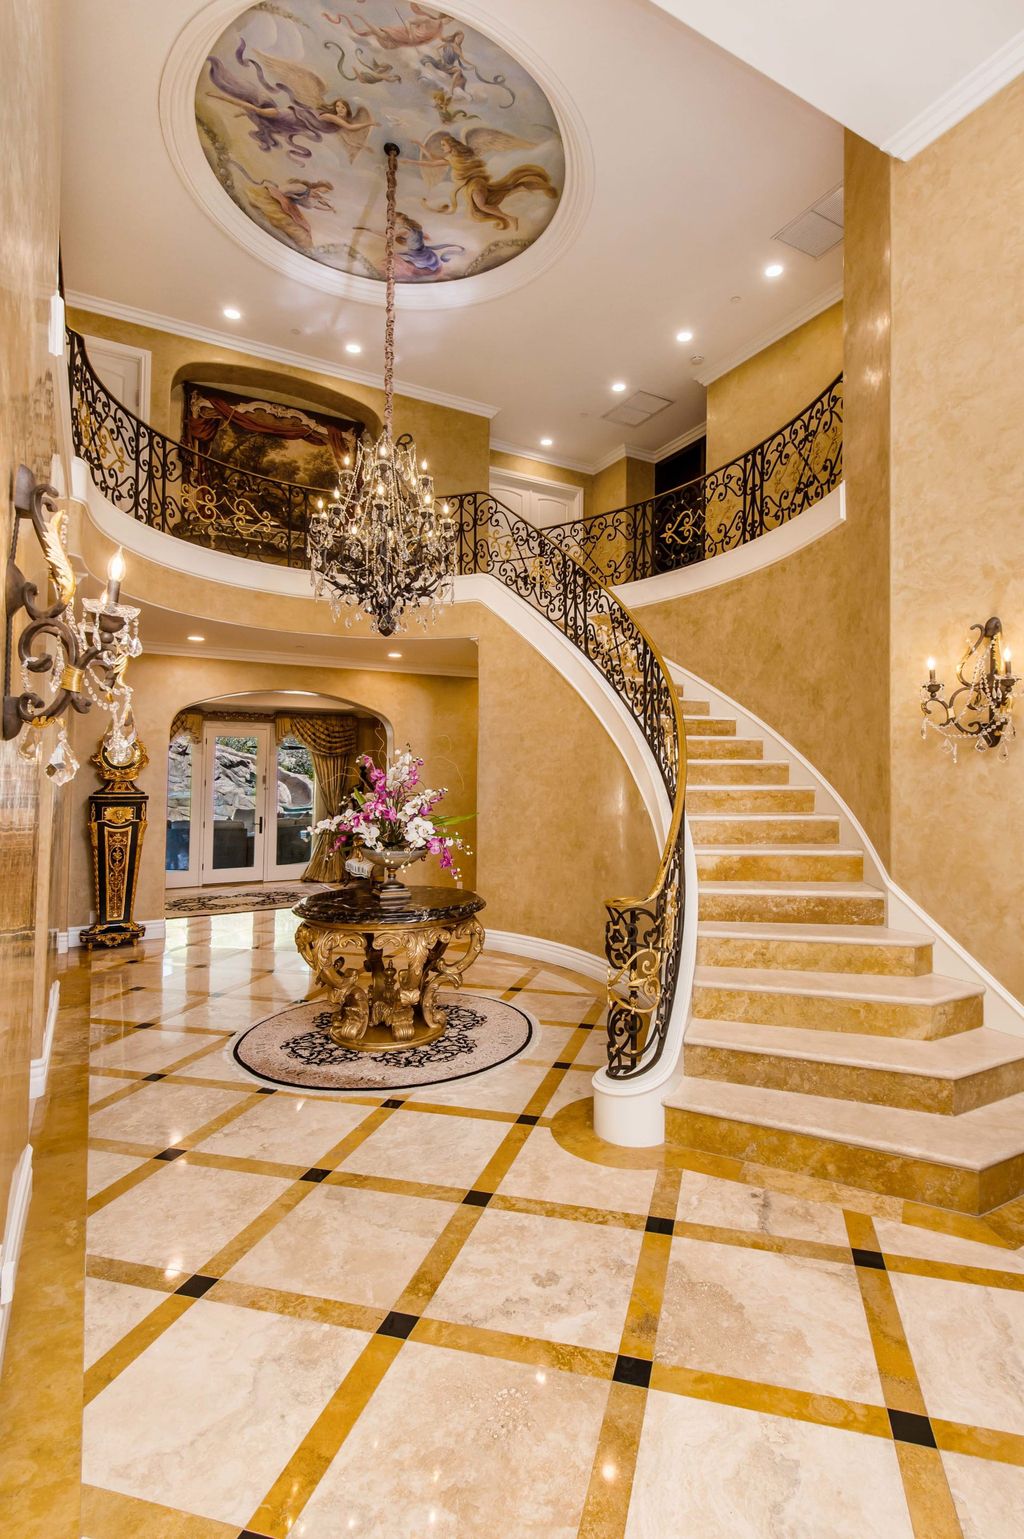 This-12995000-Mediterranean-Villa-in-Calabasas-has-a-Stunning-Two-Story-Entry-15